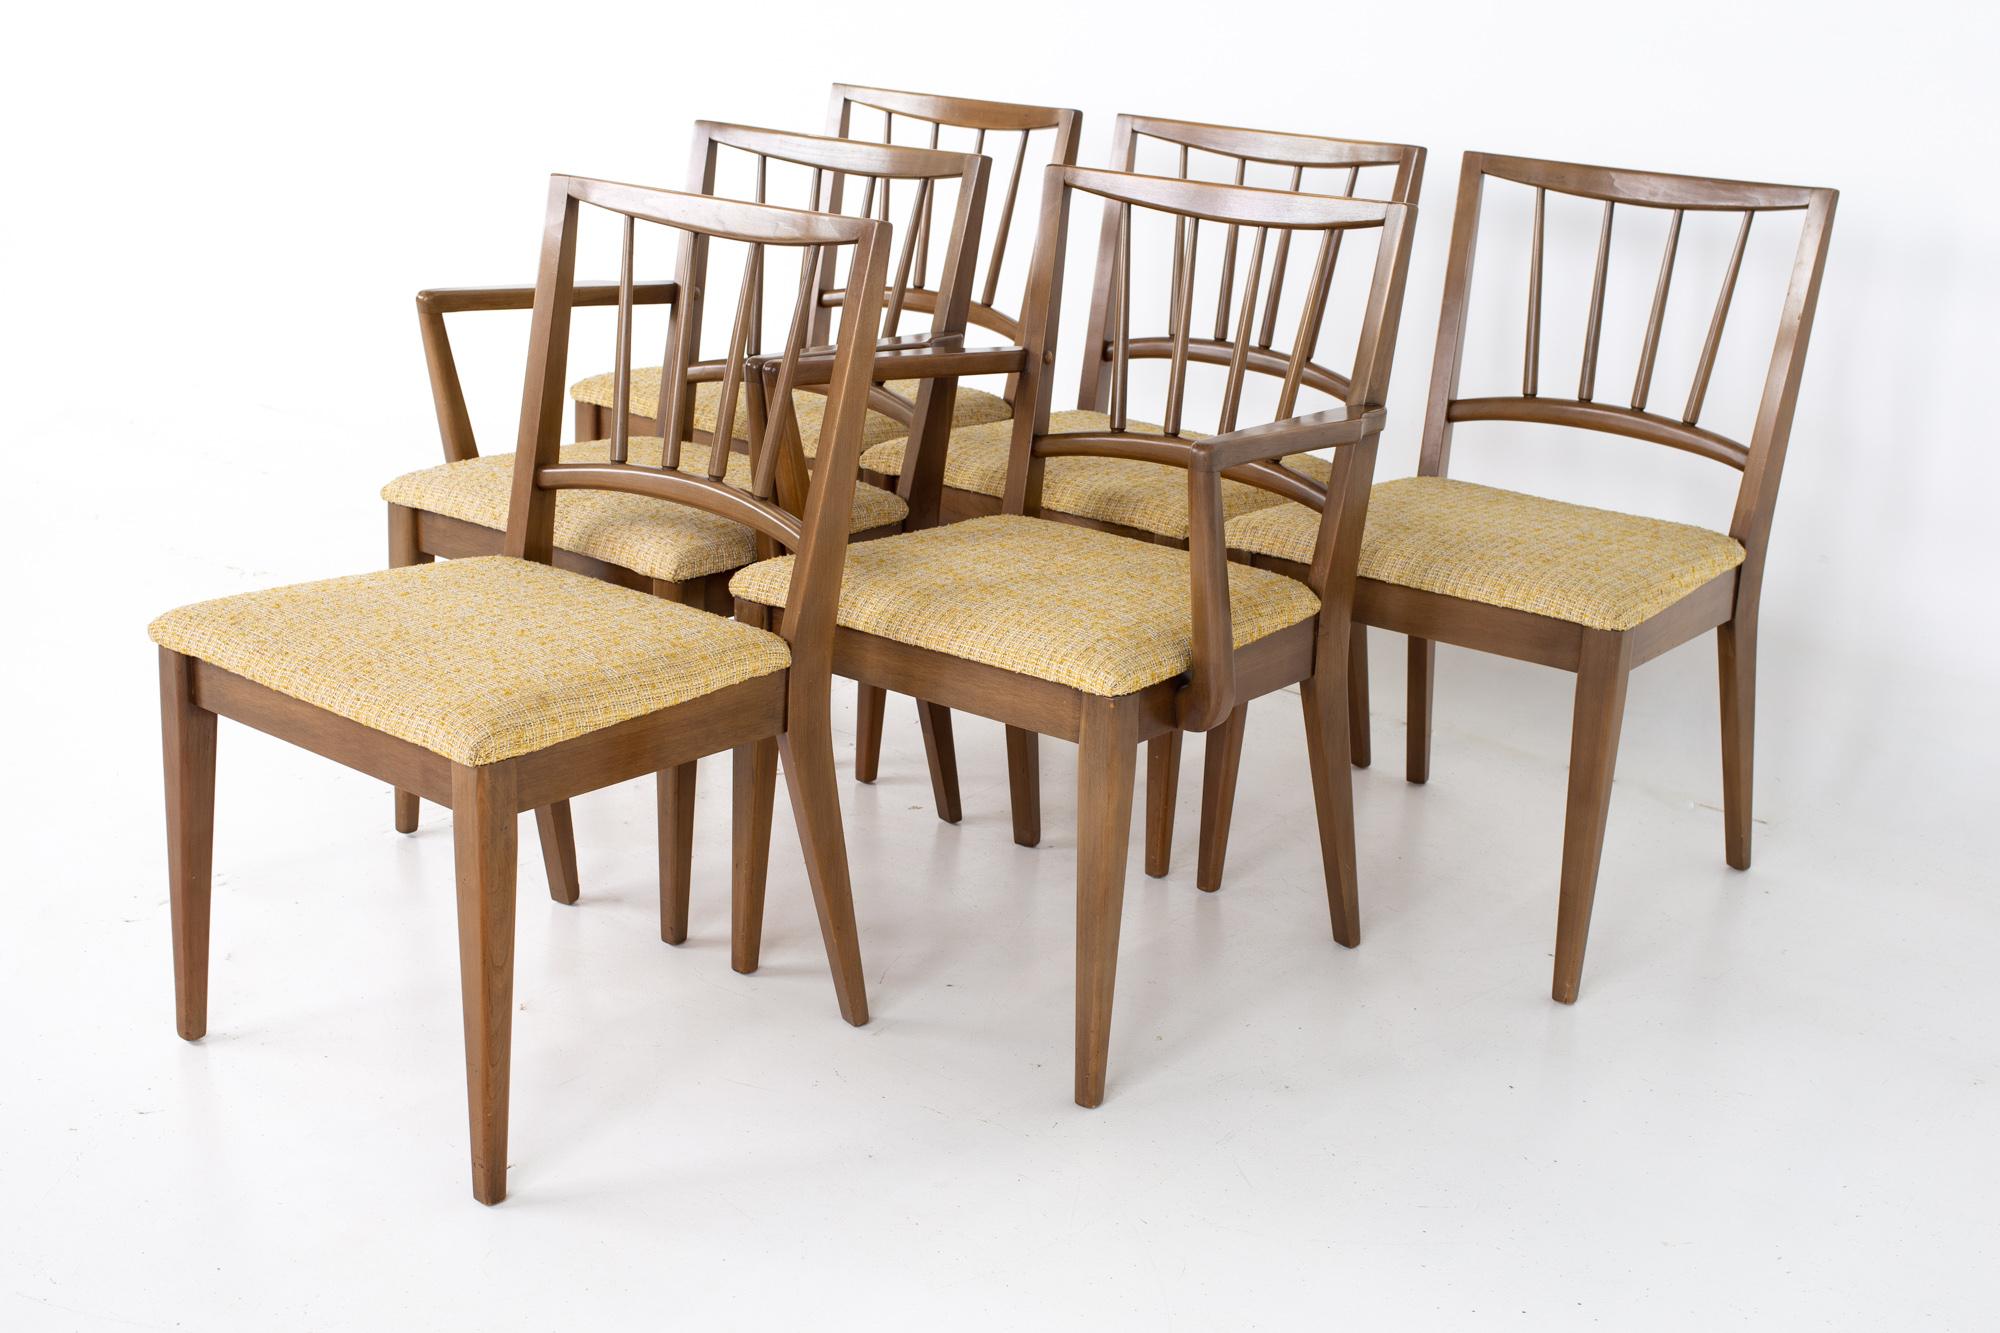 Century Furniture mid century walnut dining chairs - set of 6.
Each chair measures: 22 wide x 20.25 deep x 33 high, with a seat height of 18 inches

All pieces of furniture can be had in what we call restored vintage condition. That means the